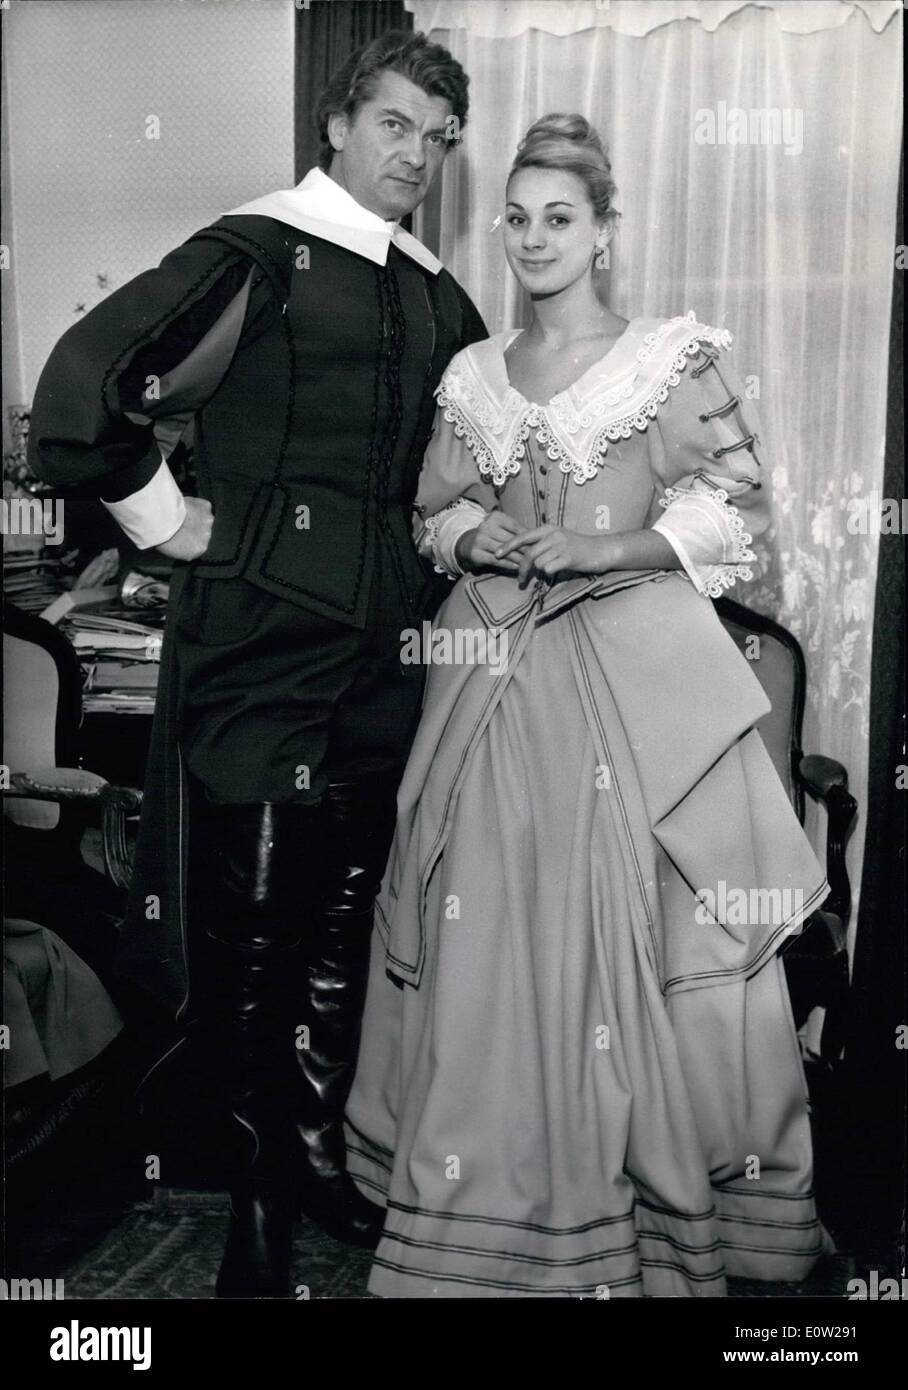 Dec. 12, 1960 - Jean Marais in new cloak and dagger film: Jean Marais who has been specializing in cloak and dagger films lately is now starring in ''Capitaine Fracasse'' based on the famous novel by Theophile Gautier. Jean Marais and his pretty partner Genevieve Grad trying on the costumes they wear in the film. Stock Photo